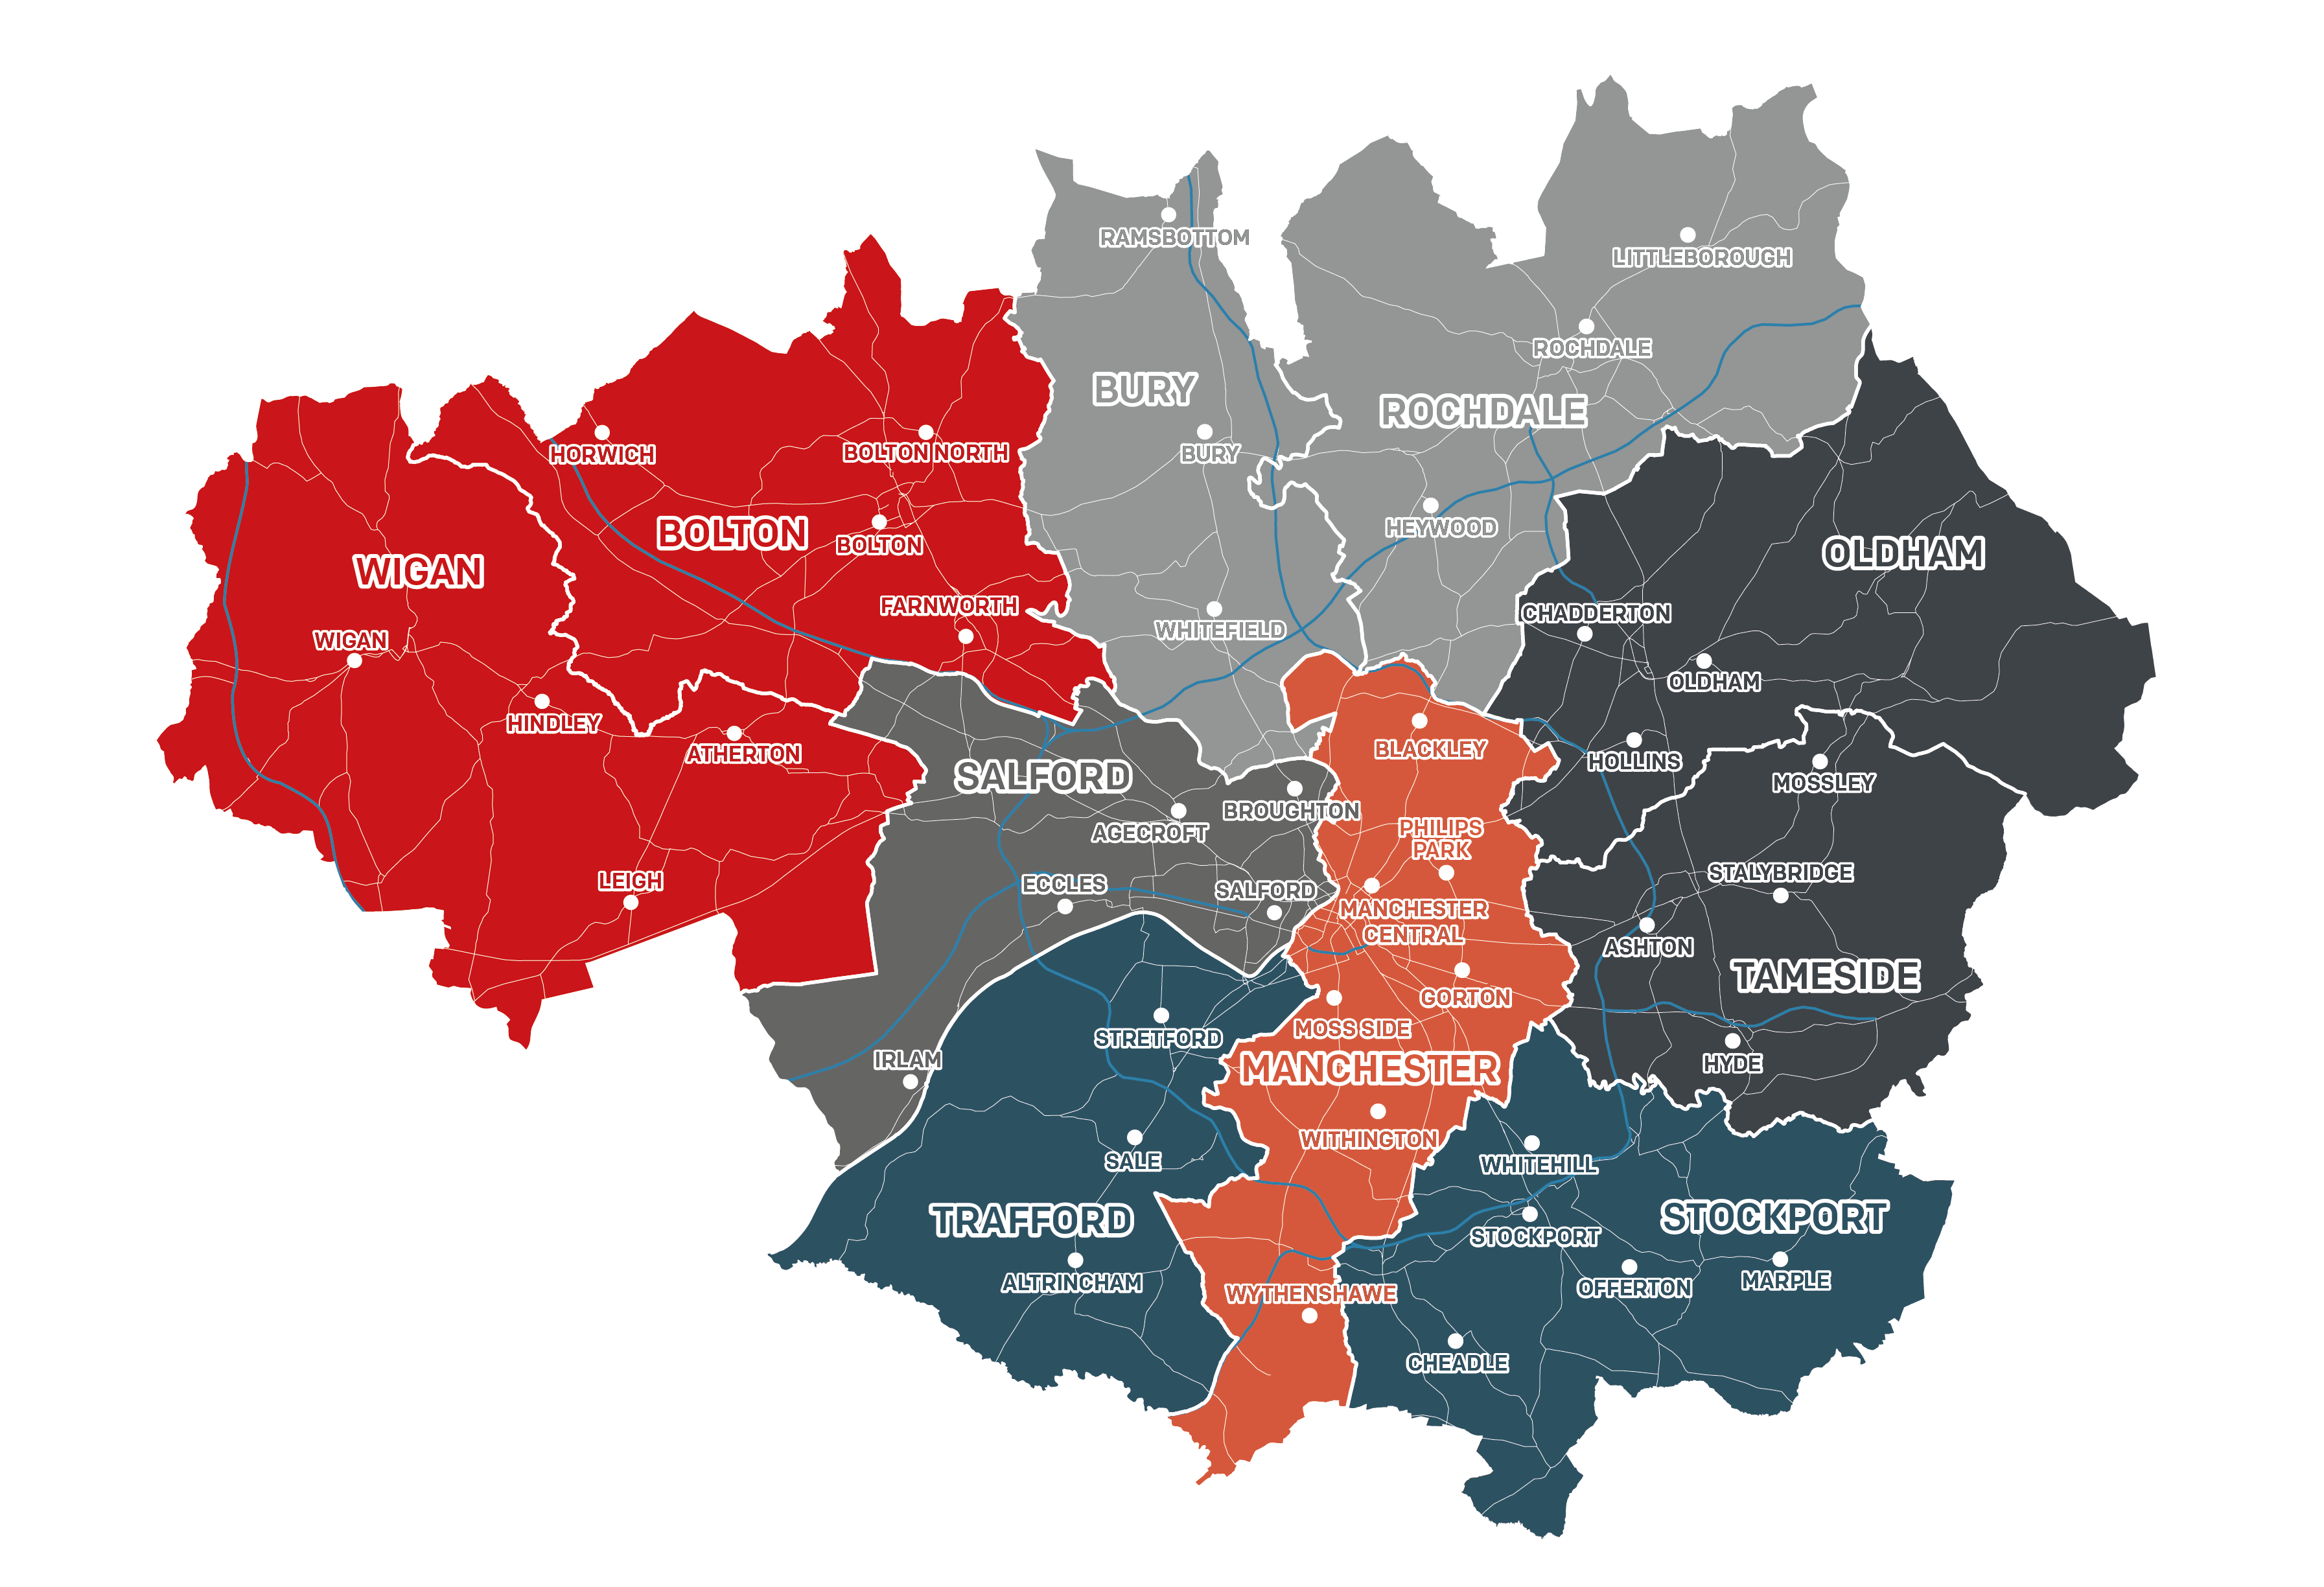 Map of Greater Manchester showing each borough with location labels to show locations of fire stations